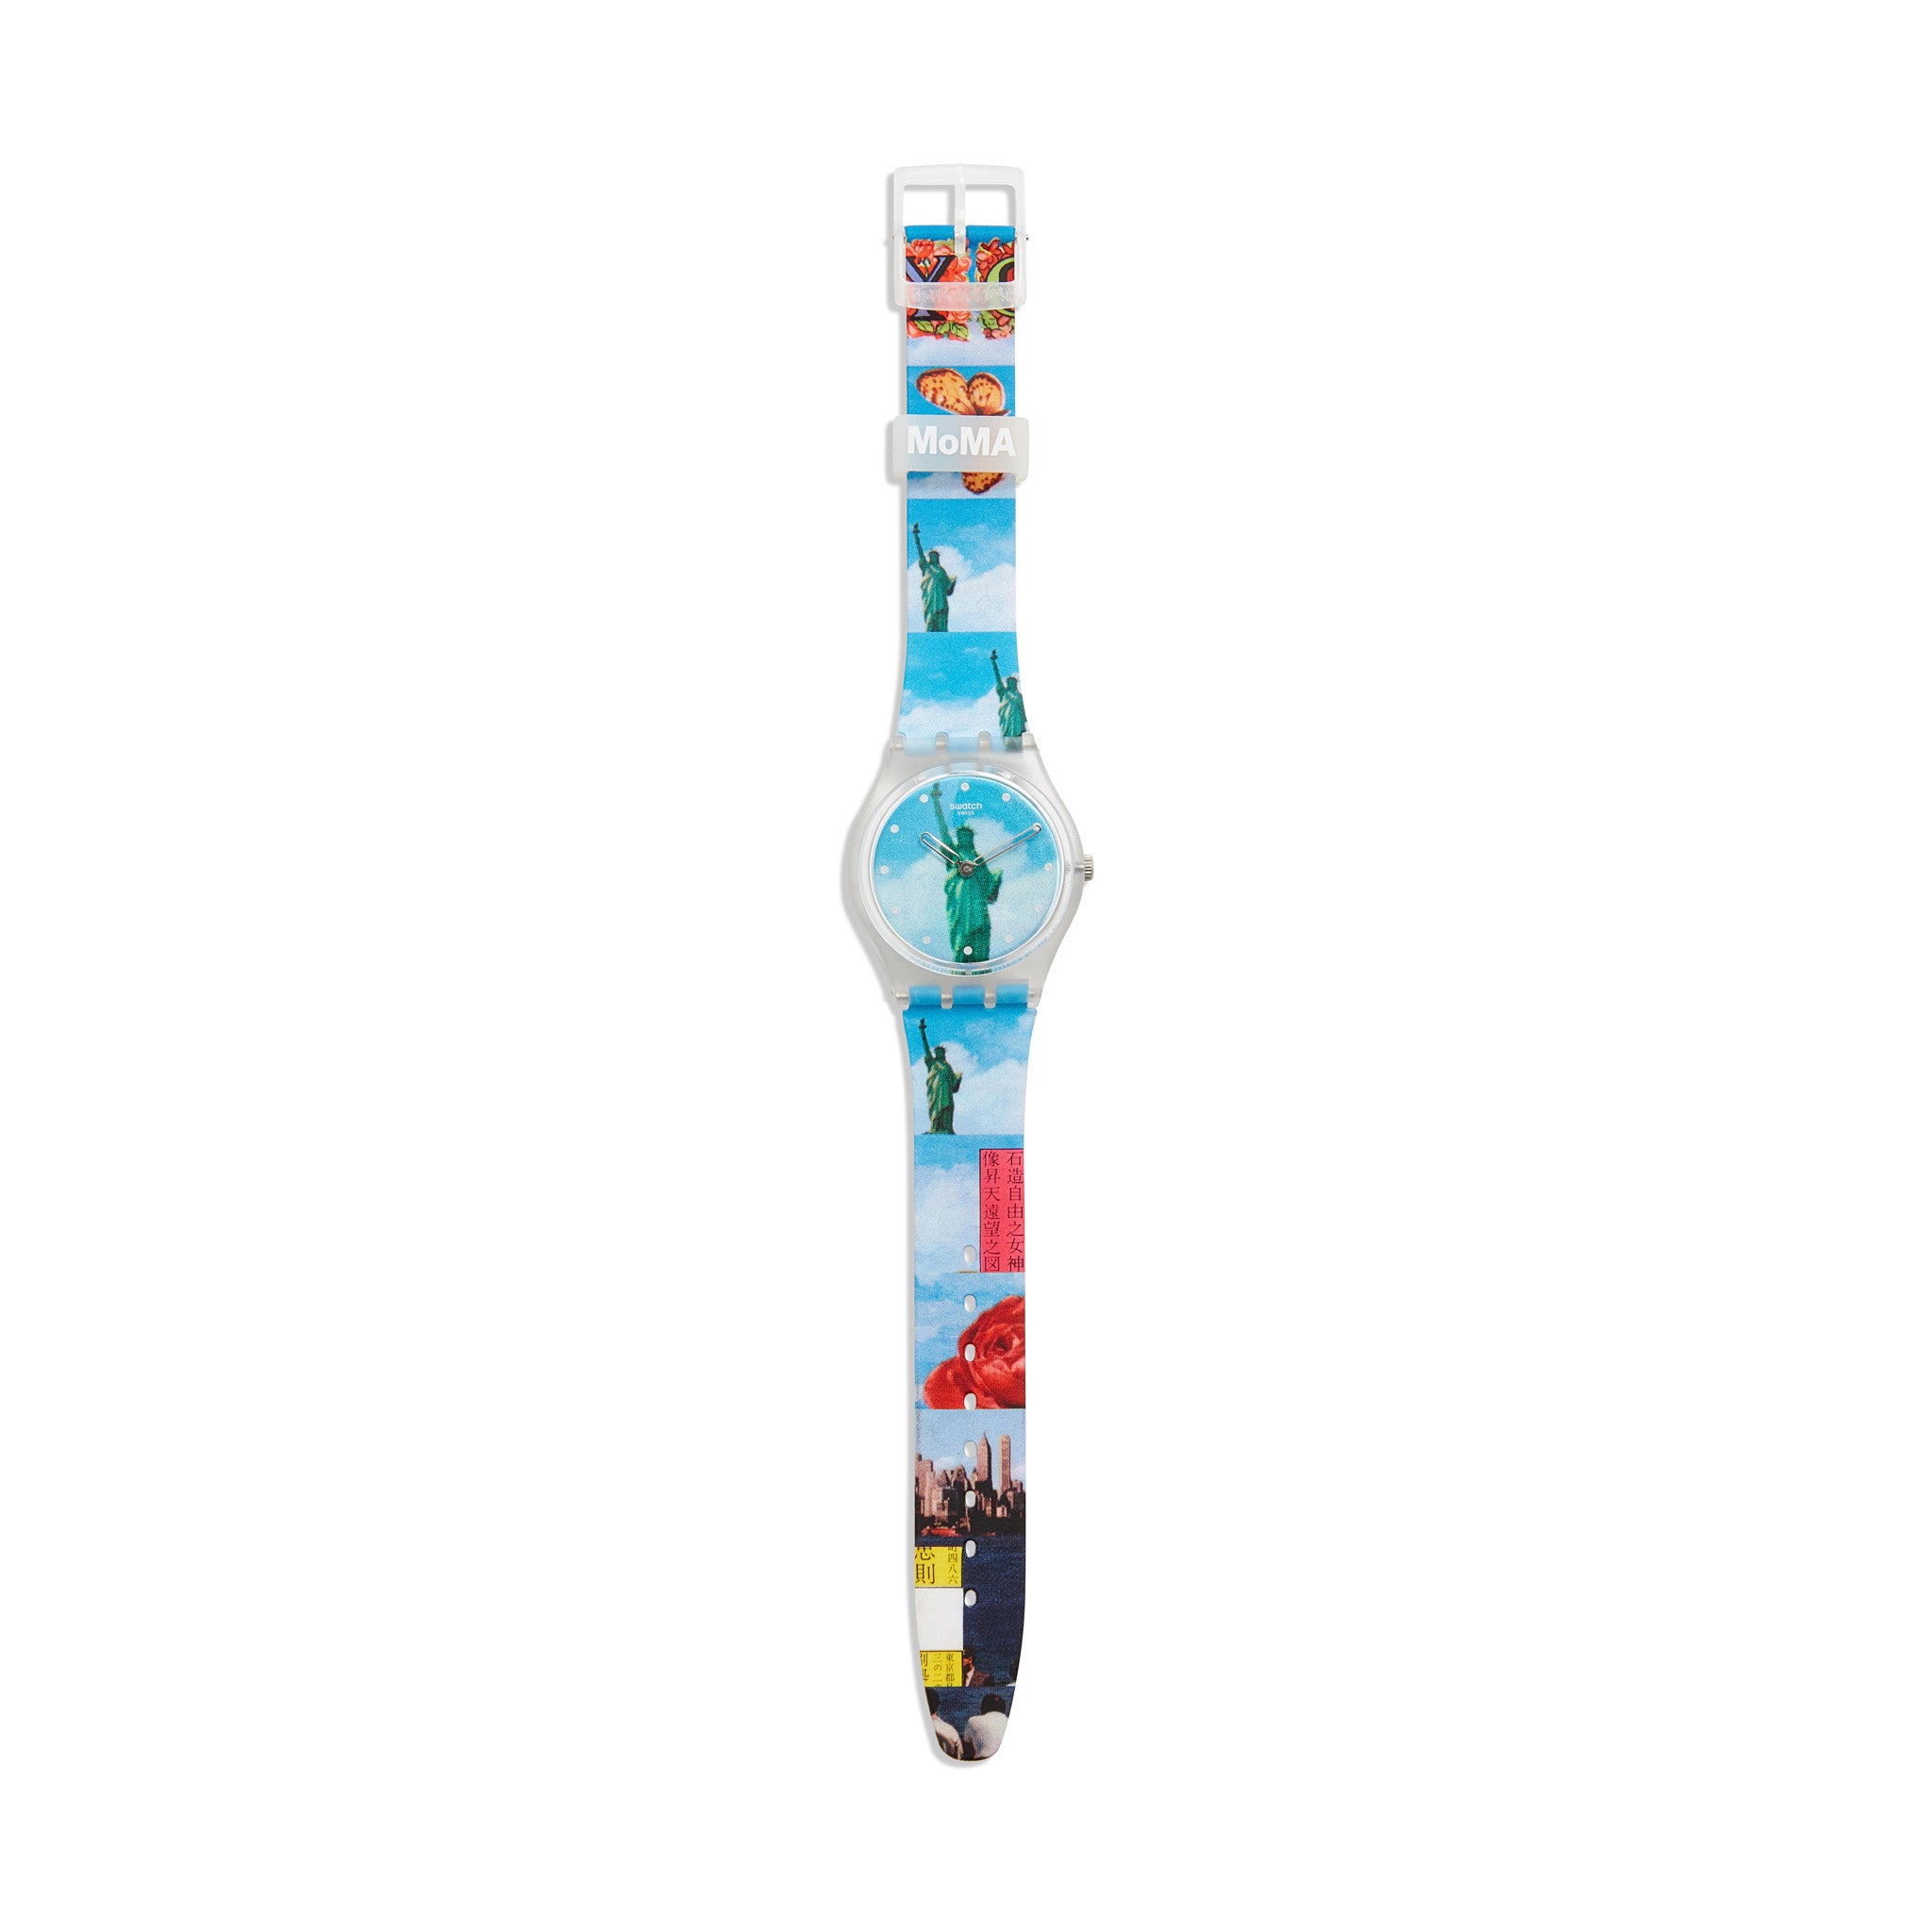 Swatch X MoMA watches